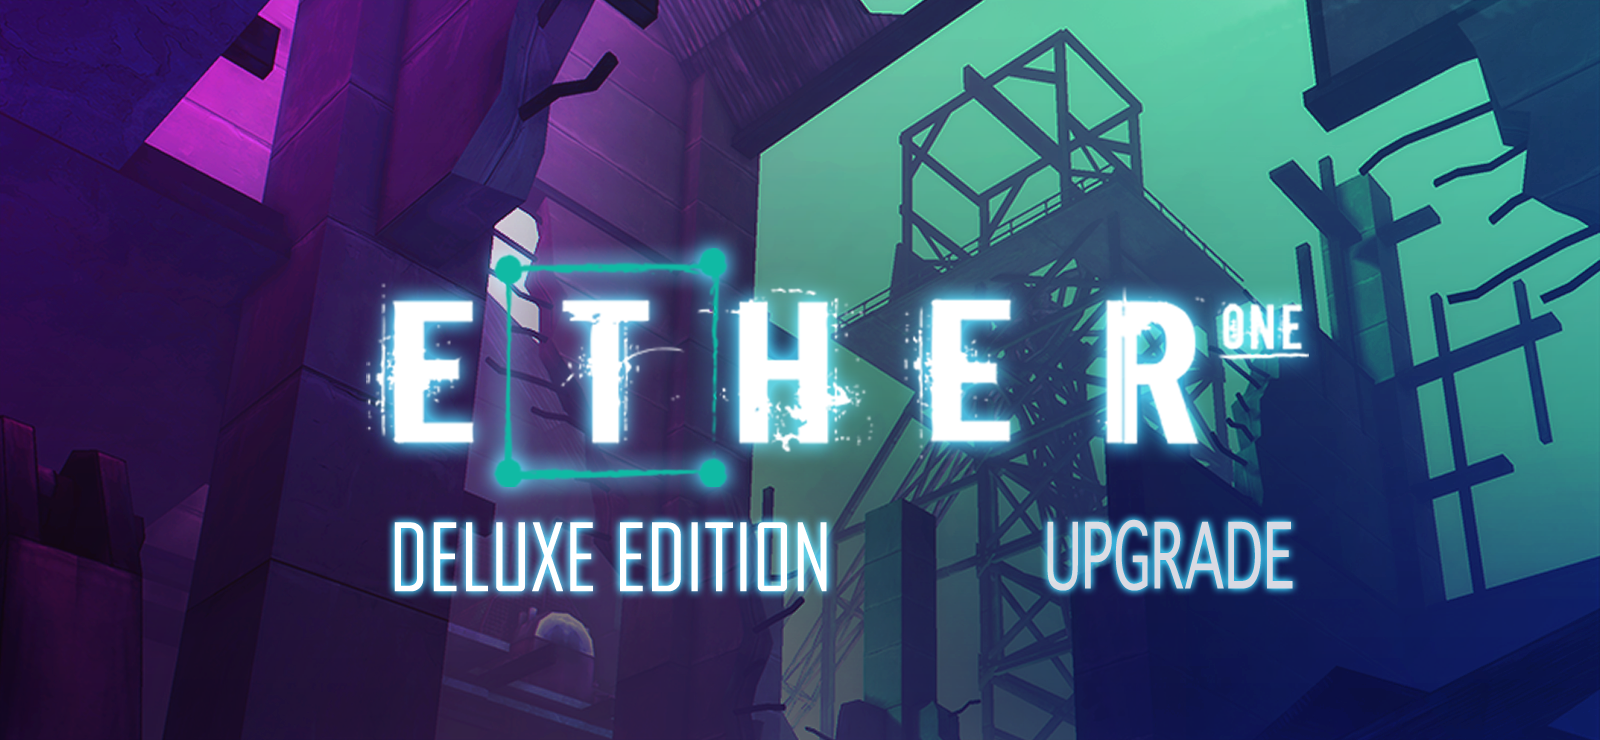 Ether One Redux Deluxe Edition Upgrade